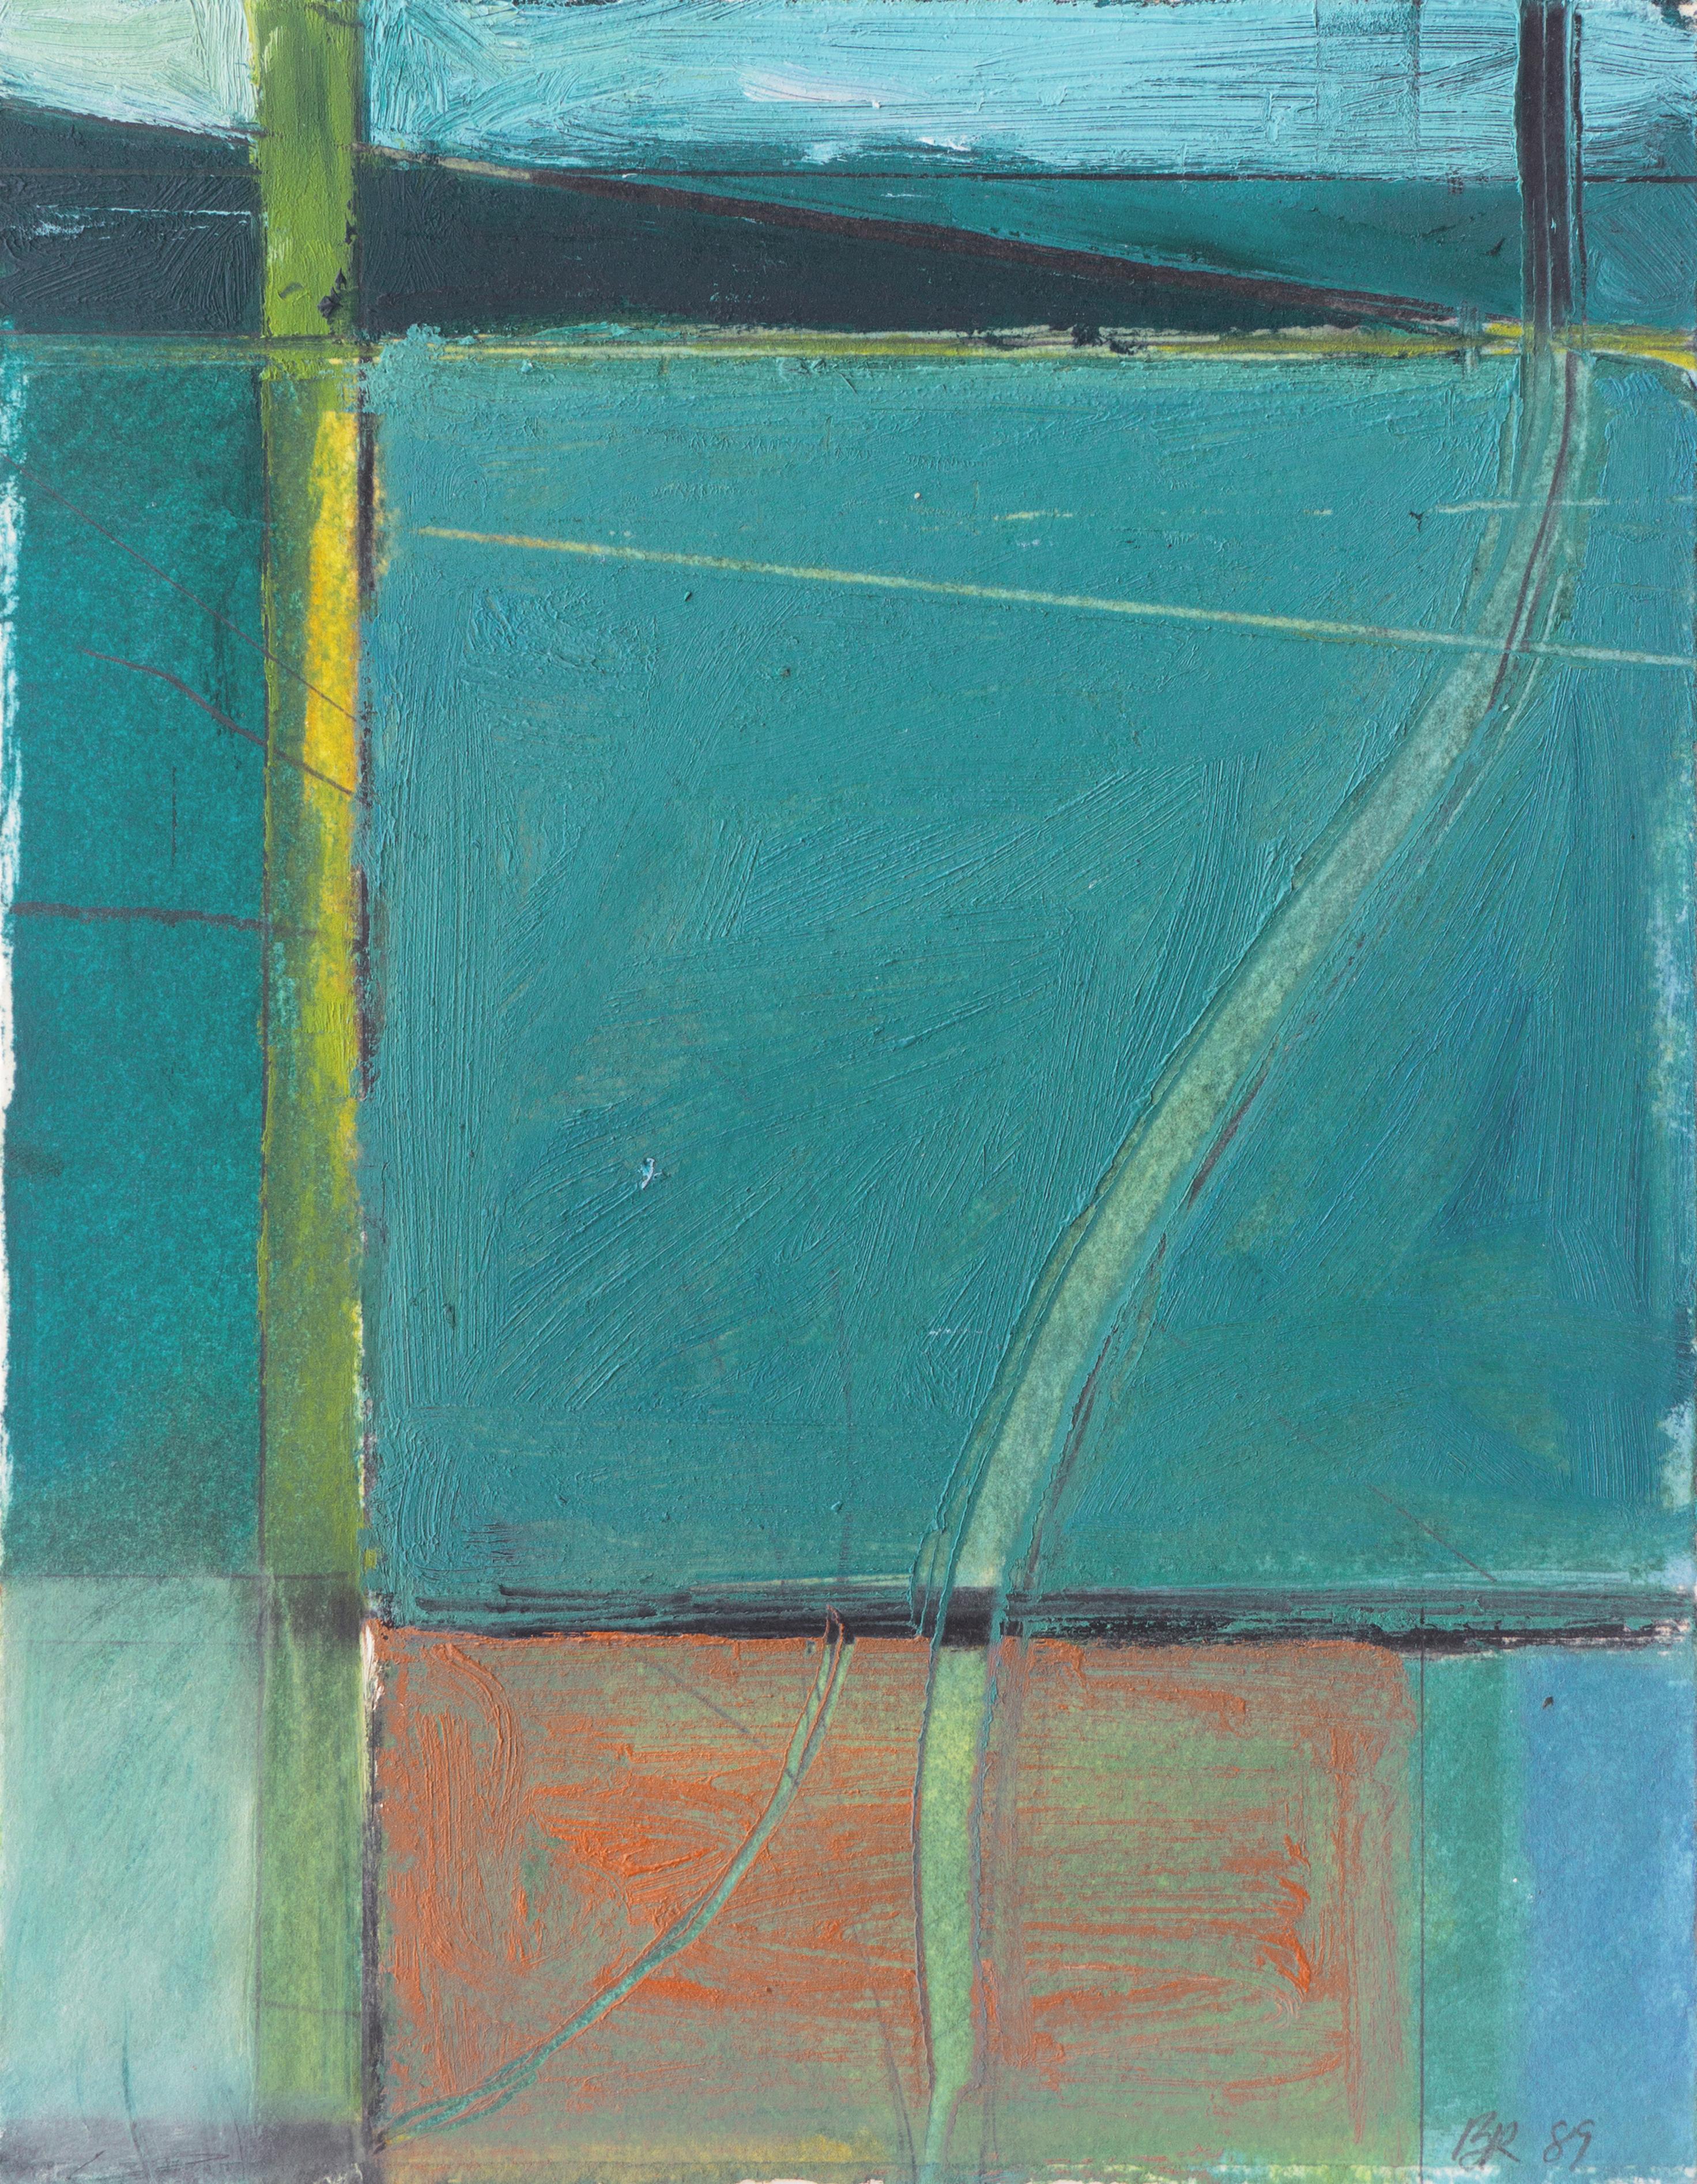 Barbara Rainforth Abstract Painting - 'Abstract in Jade', Bay Area Abstraction, Woman artist, SFMOMA, Oakland Museum